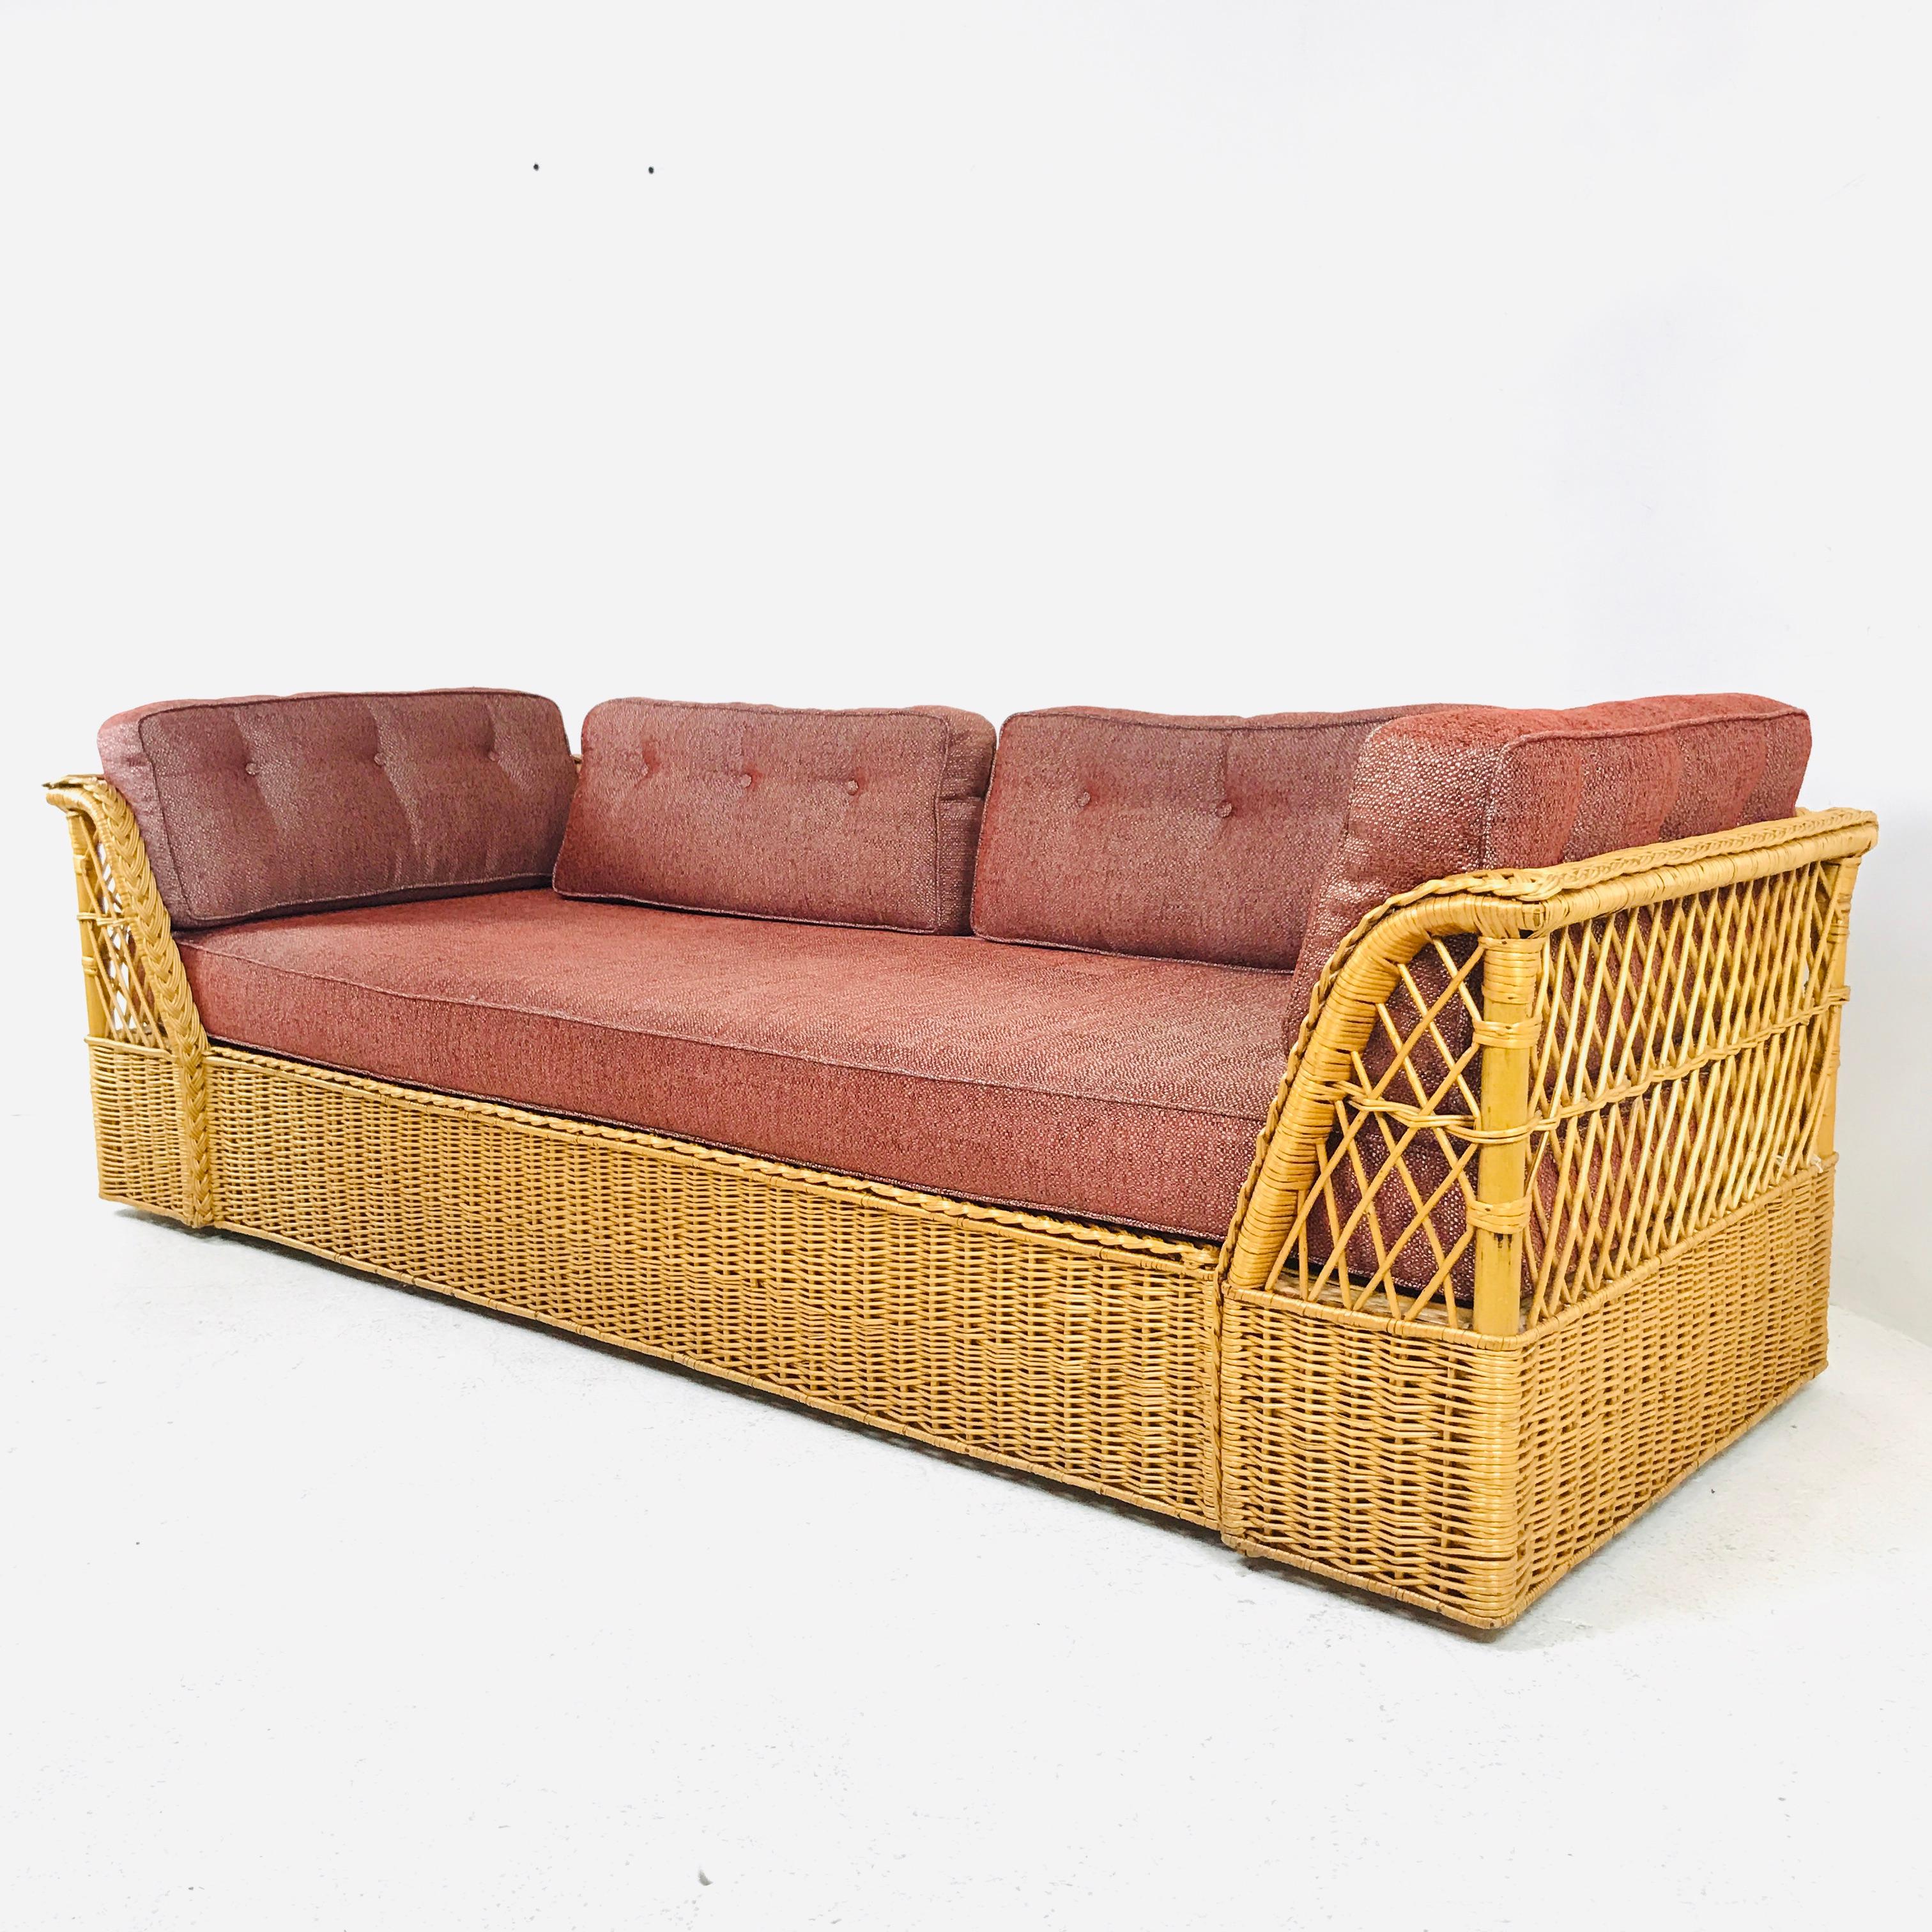 Gorgeous rattan wicker sofa made by McGuire. Features a rattan and wood frame covered with woven wicker. The bottoms have a tight weave pattern while the tops of the side and back have an open fretwork geometric design. The arms have a decorative